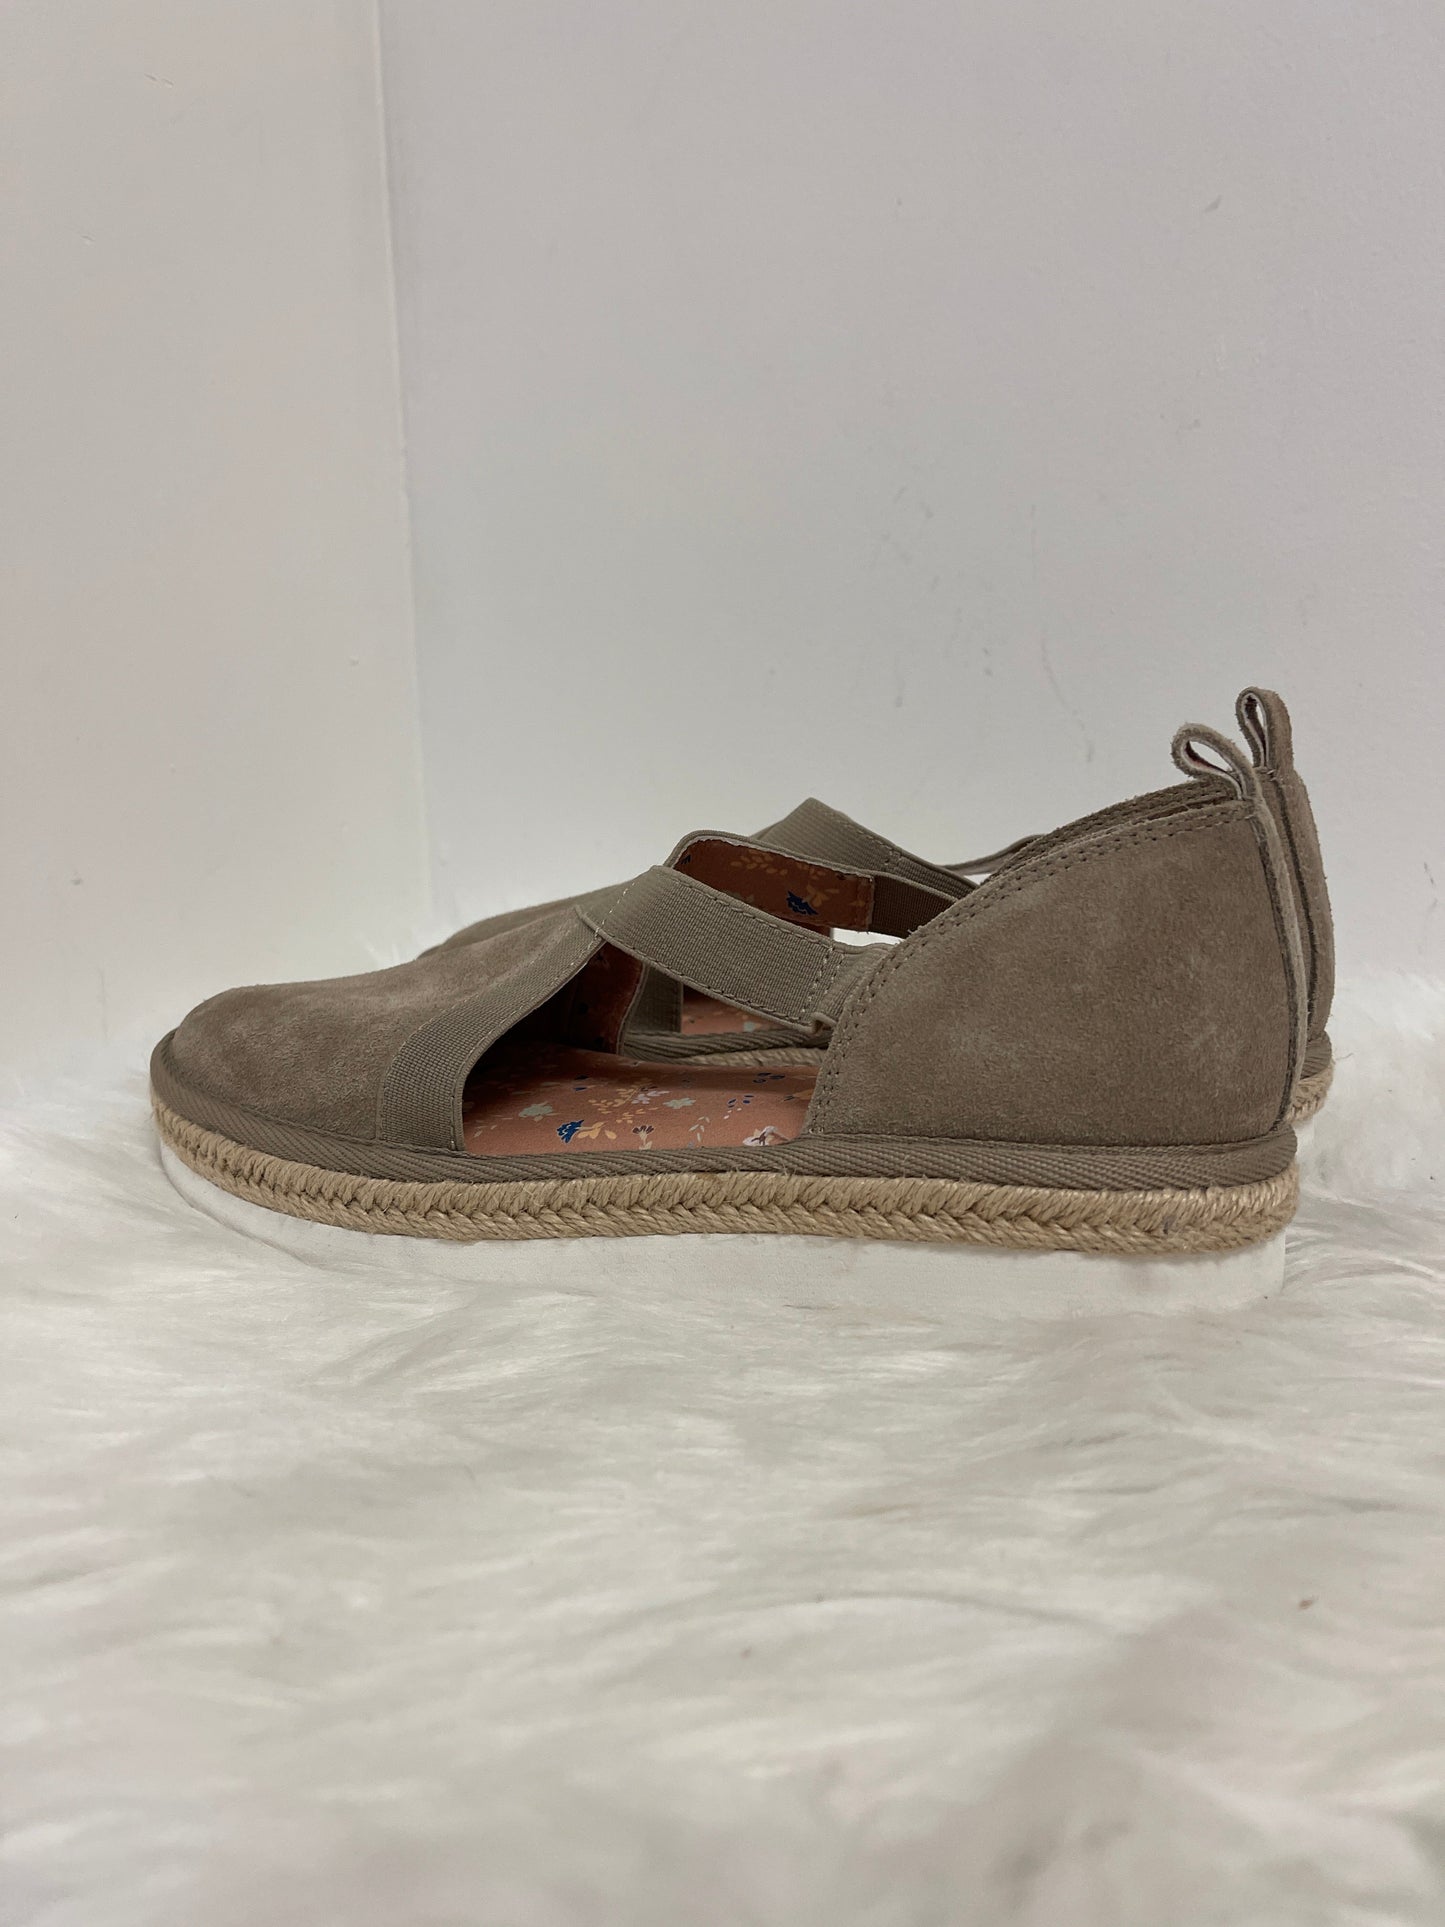 Taupe Shoes Flats Lucky Brand, Size 8